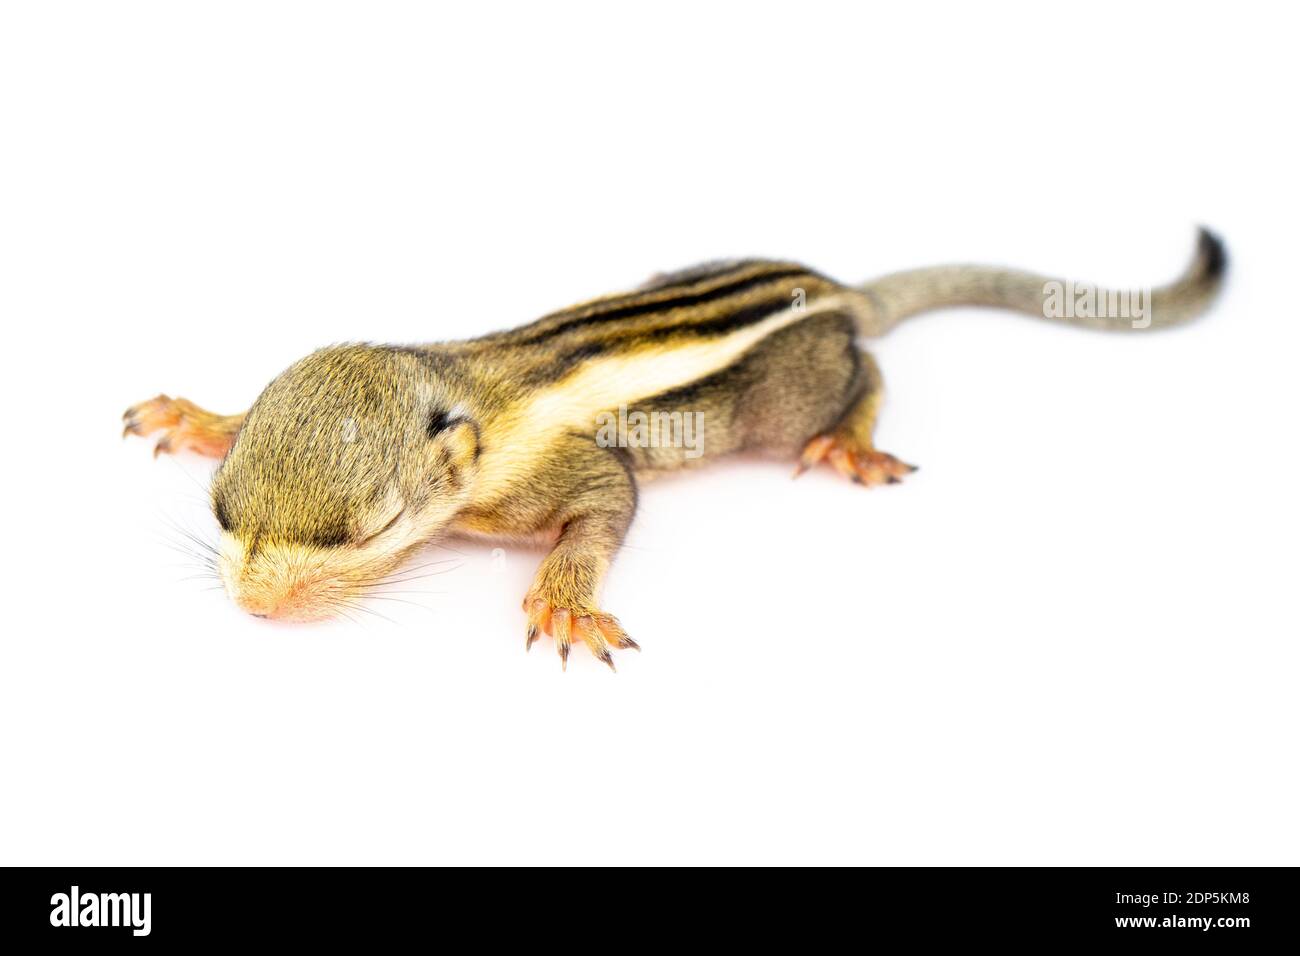 Baby himalayan striped squirrel or Baby burmese striped squirrel(Tamiops mcclellandii) on white background. Wild Animals. Stock Photo